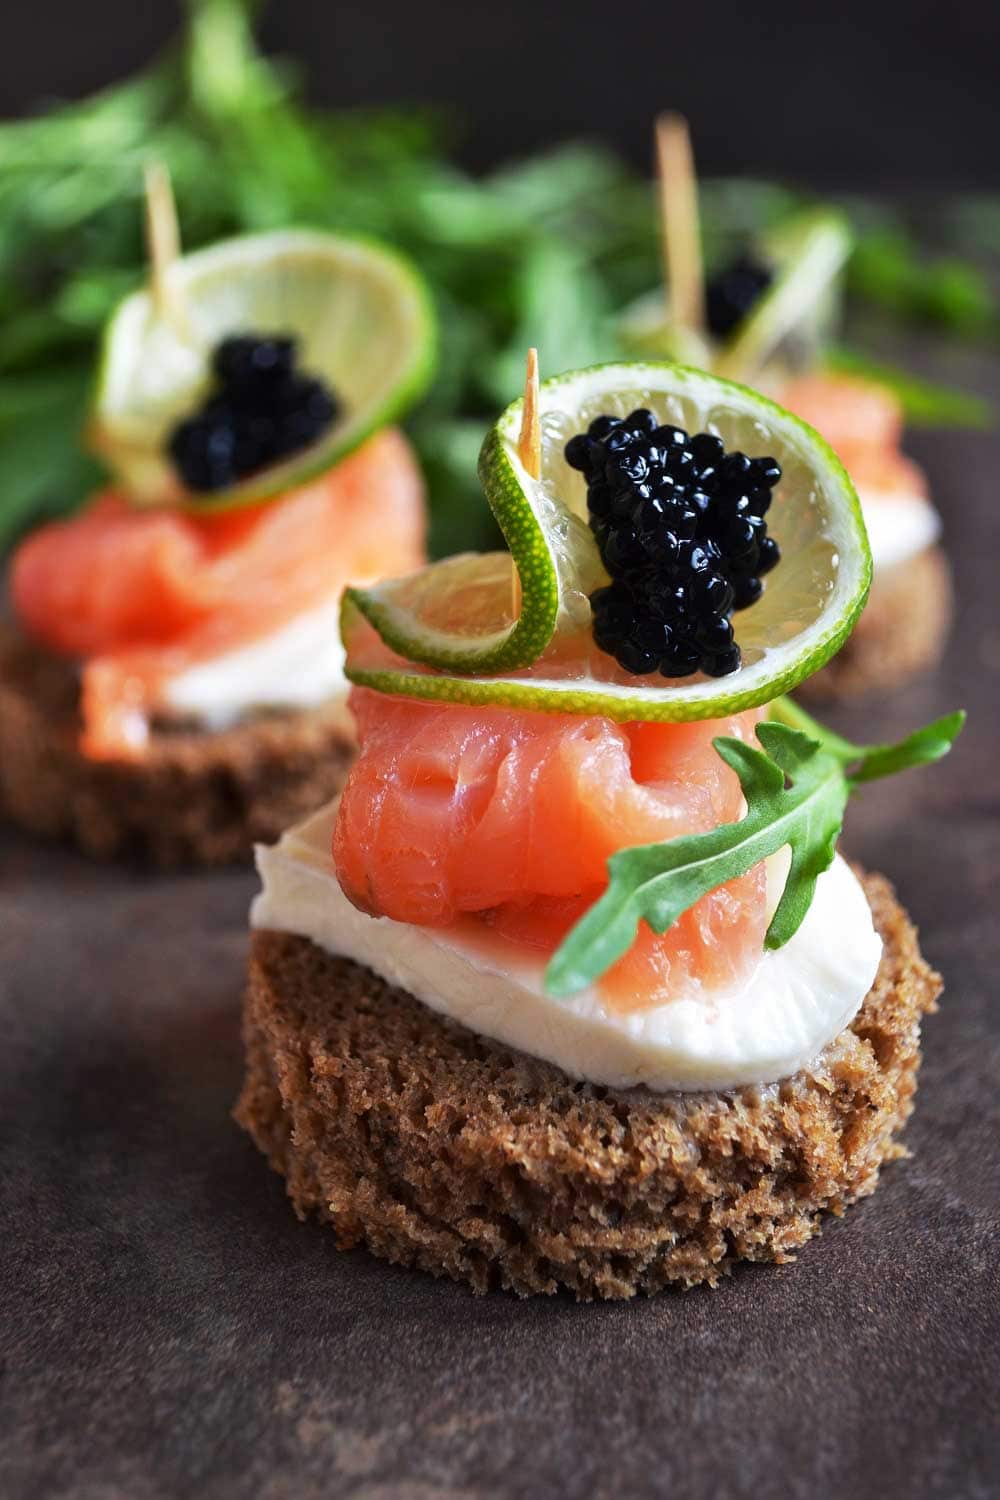 Festive Fish Appetizers with slightly salted trout mozzarella and black caviar